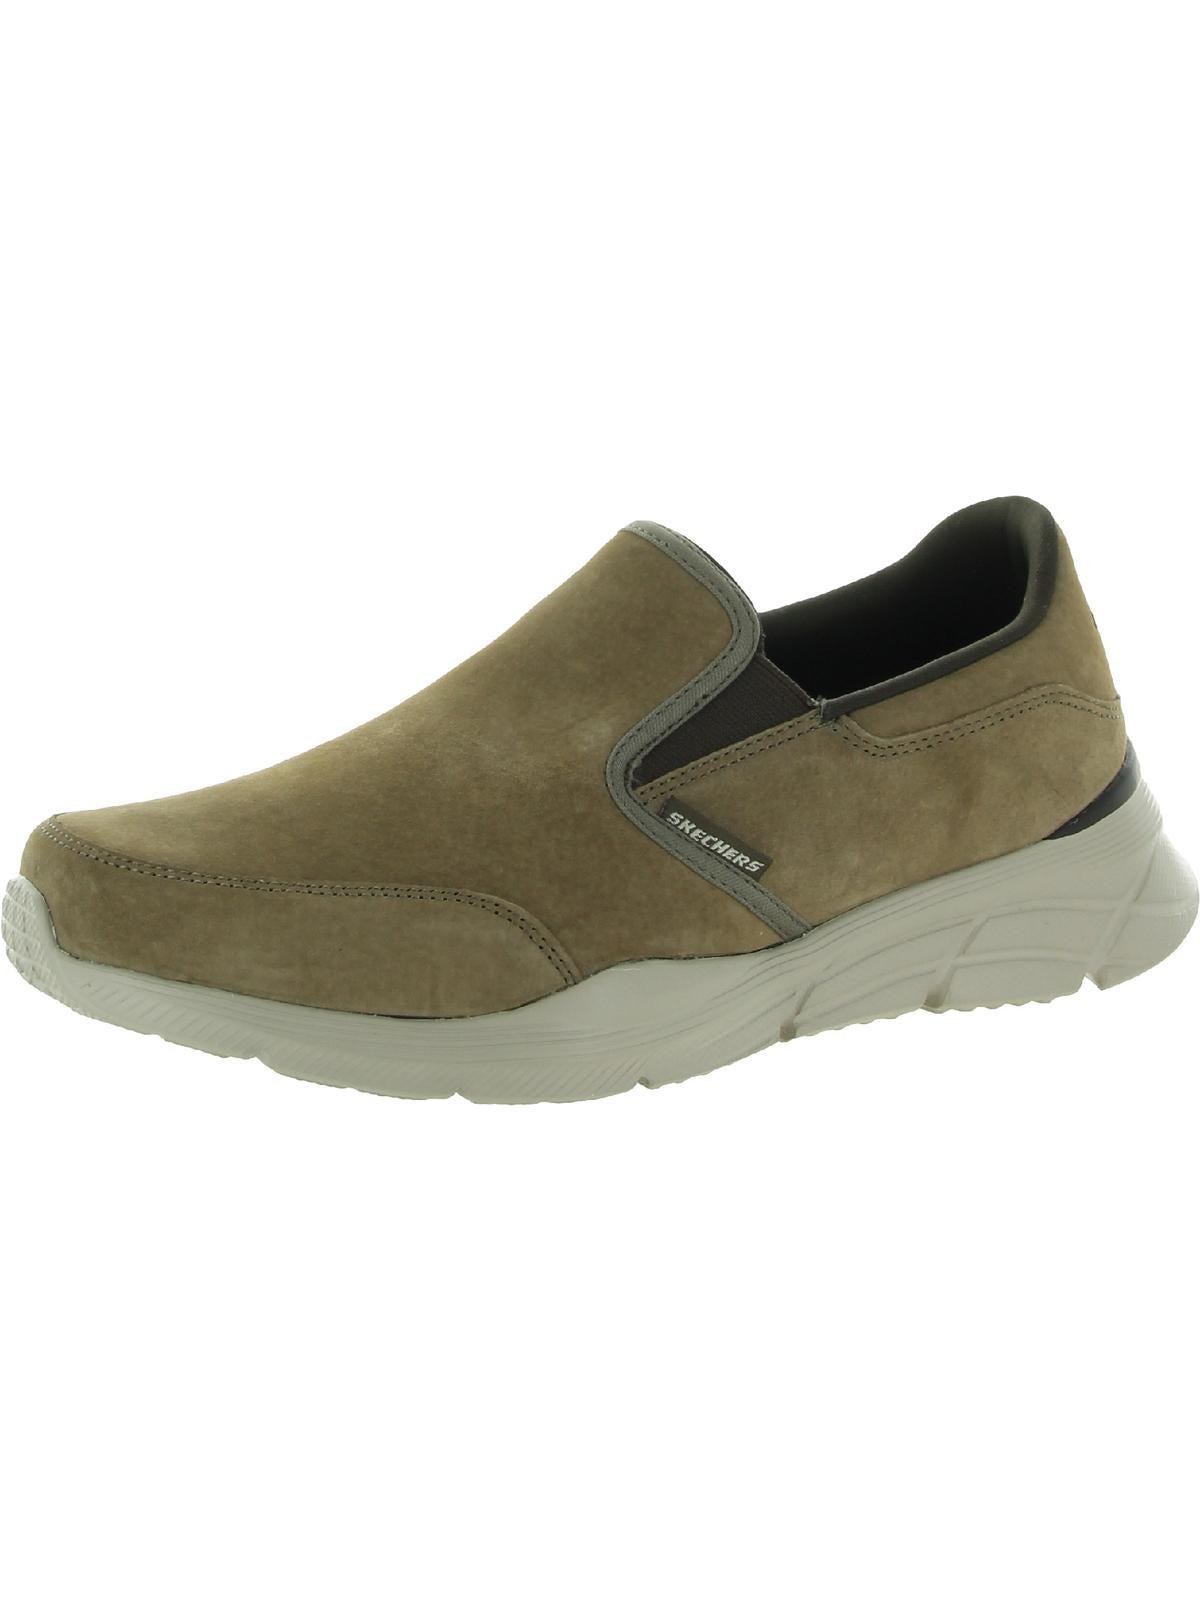 Skechers Equalizer 4.0- Myrko Leather Lifestyle Slip-on Sneakers in ...